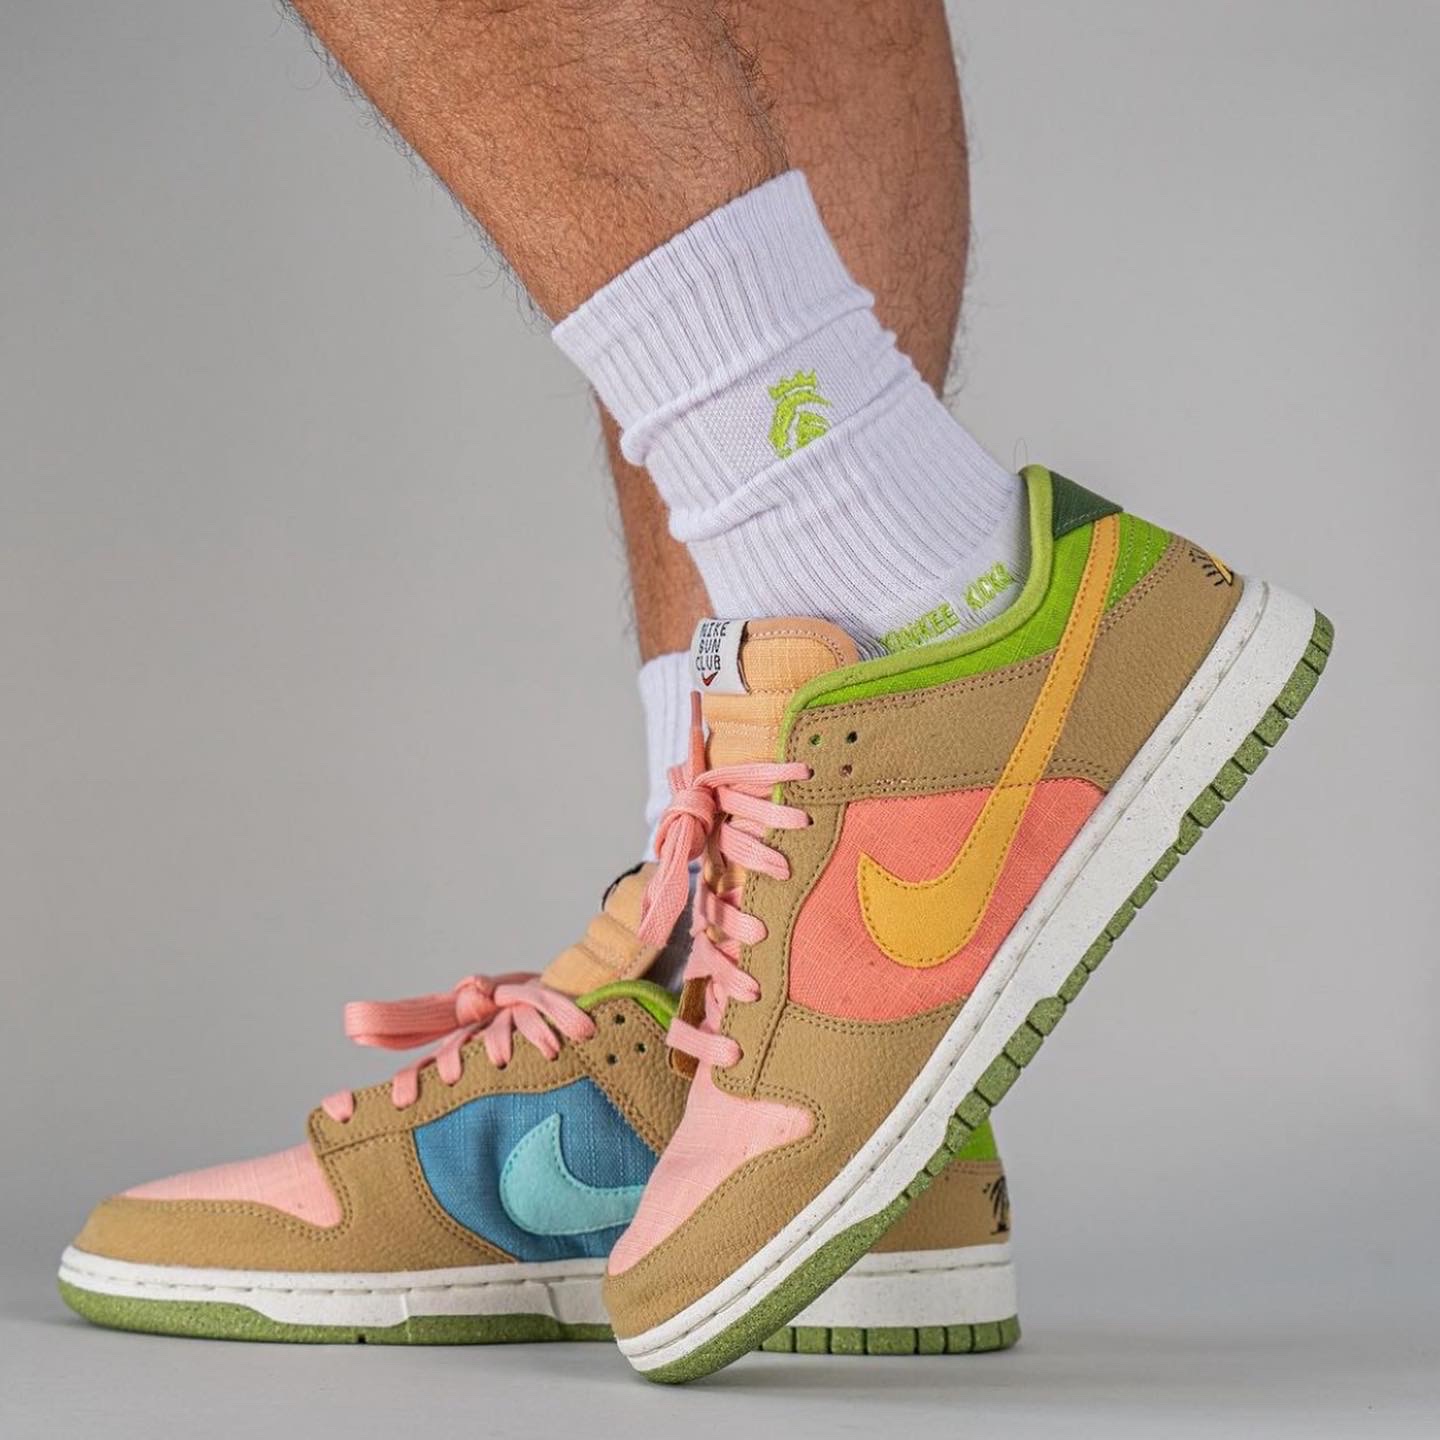 Nike Dunk Low Sun Club On Feet Review 